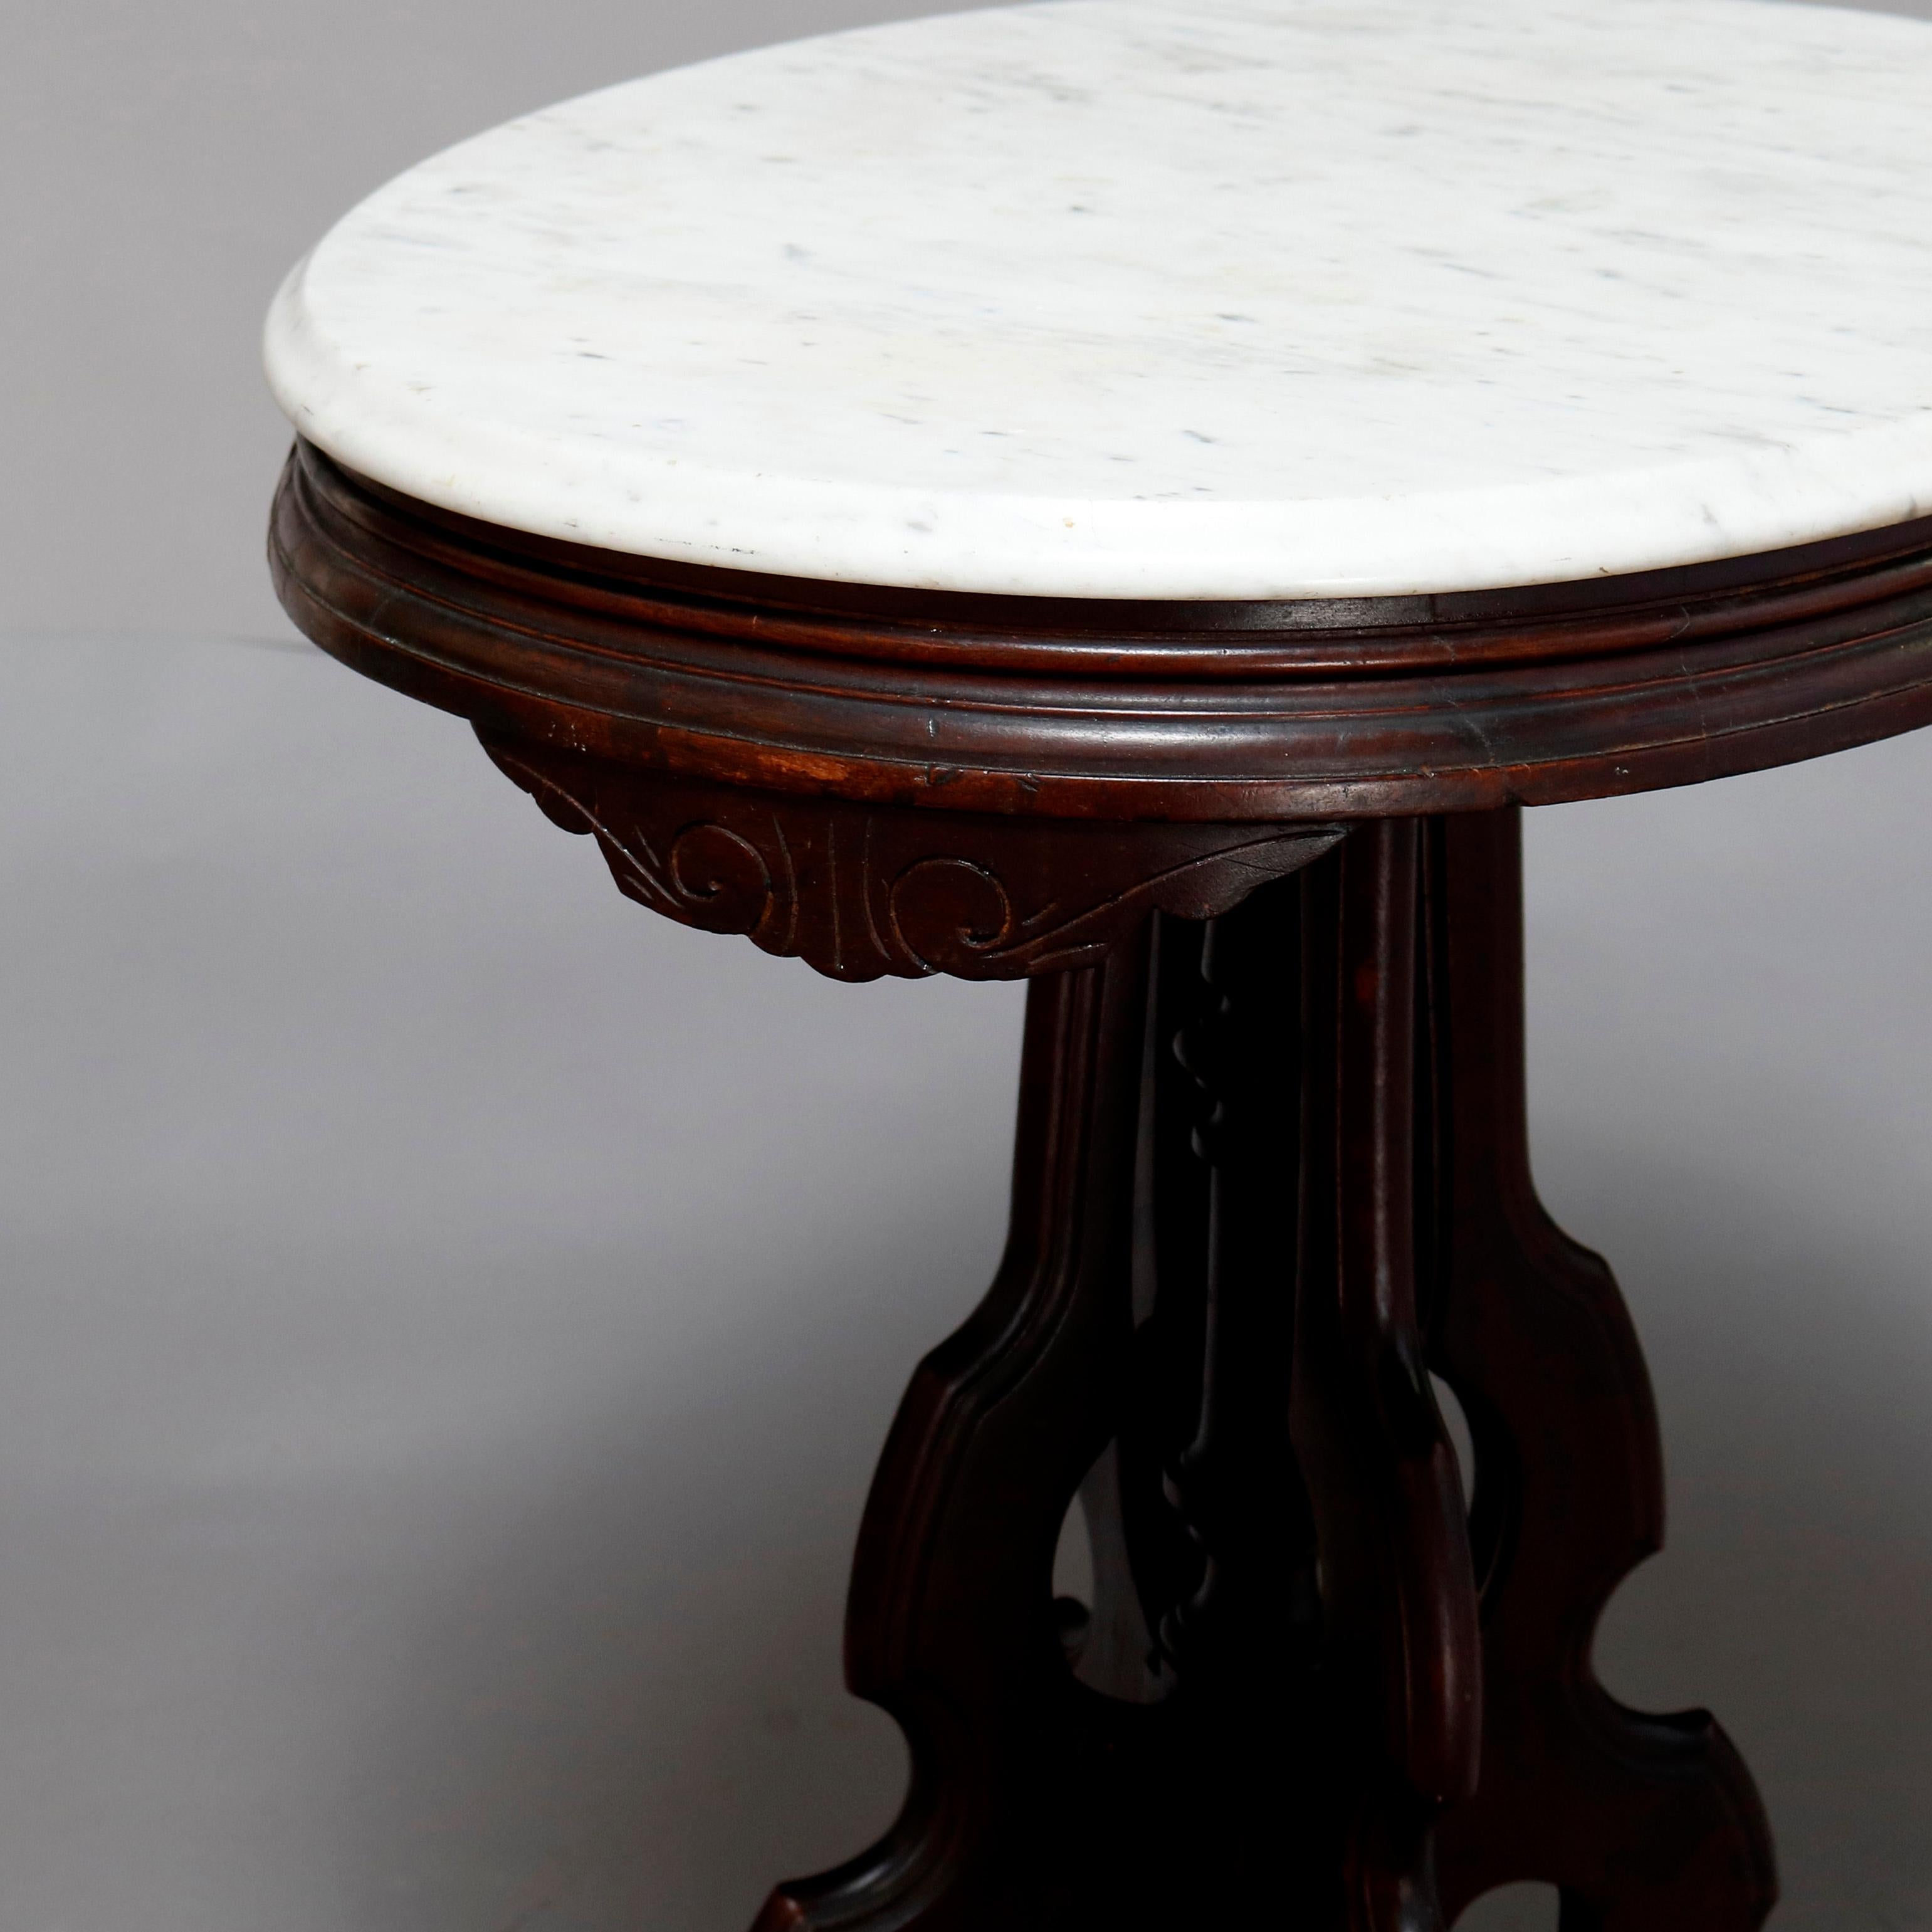 An antique Victorian Eastlake side table offers a beveled oval marble top surmounting carved walnut frame having shaped skirt, raised on shaped legs with central turned column and drop finial, circa 1880

***DELIVERY NOTICE – Due to COVID-19 we have